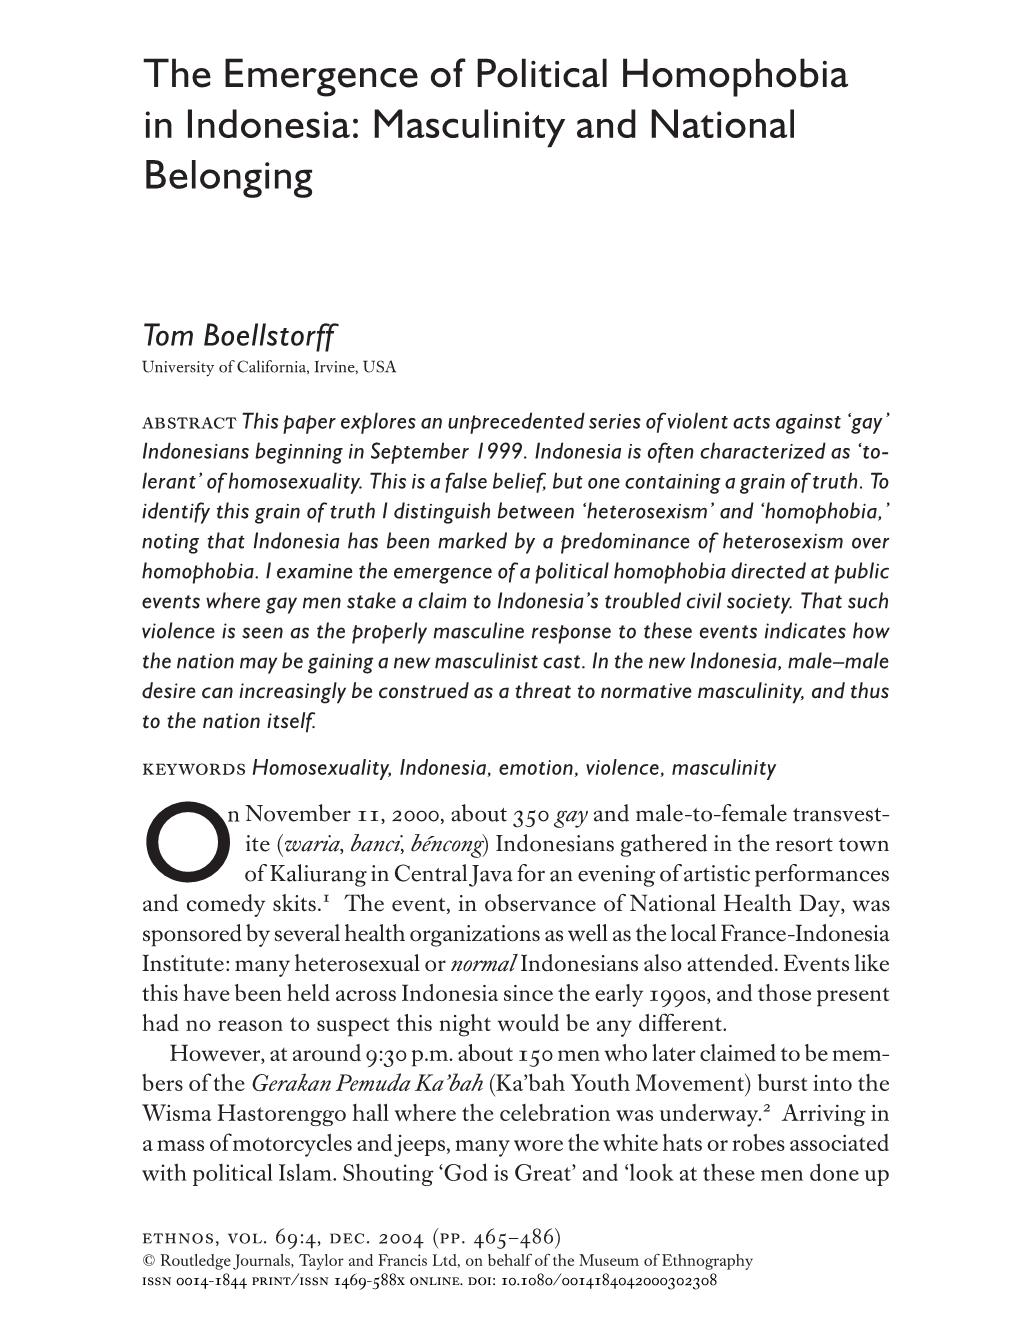 The Emergence of Political Homophobia in Indonesia 465 the Emergence of Political Homophobia in Indonesia: Masculinity and National Belonging